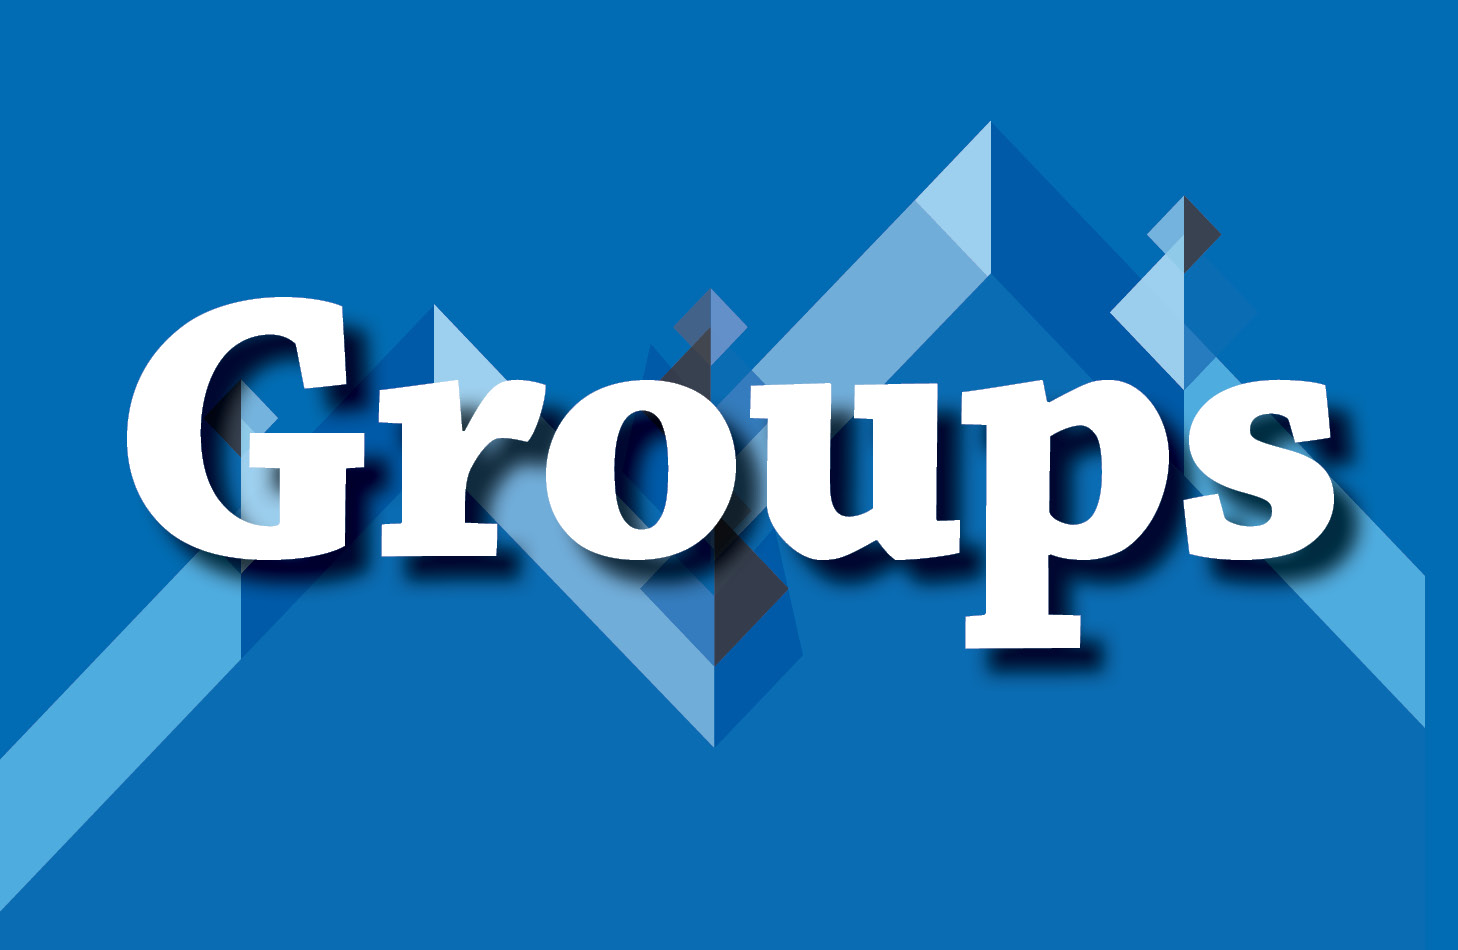 Group Rates